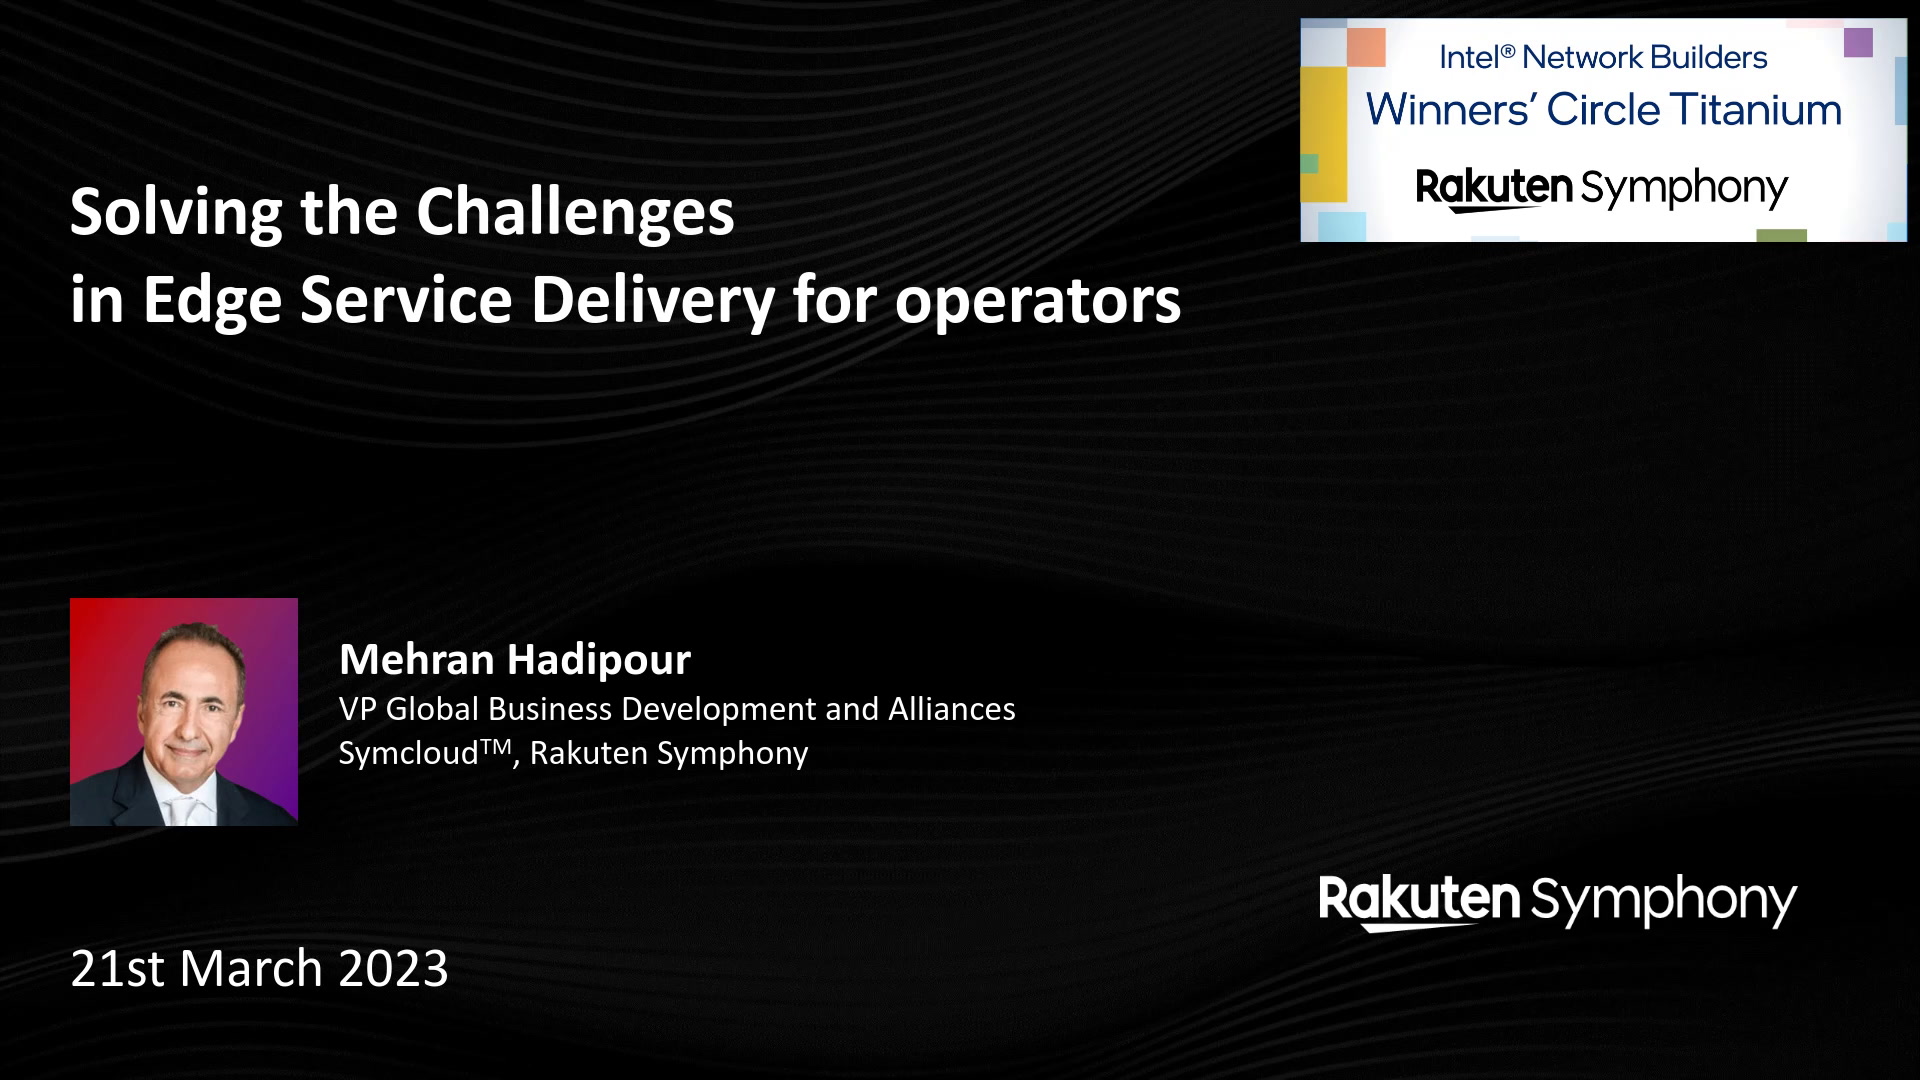 Solving the Challenges in Edge Service Delivery for Operators